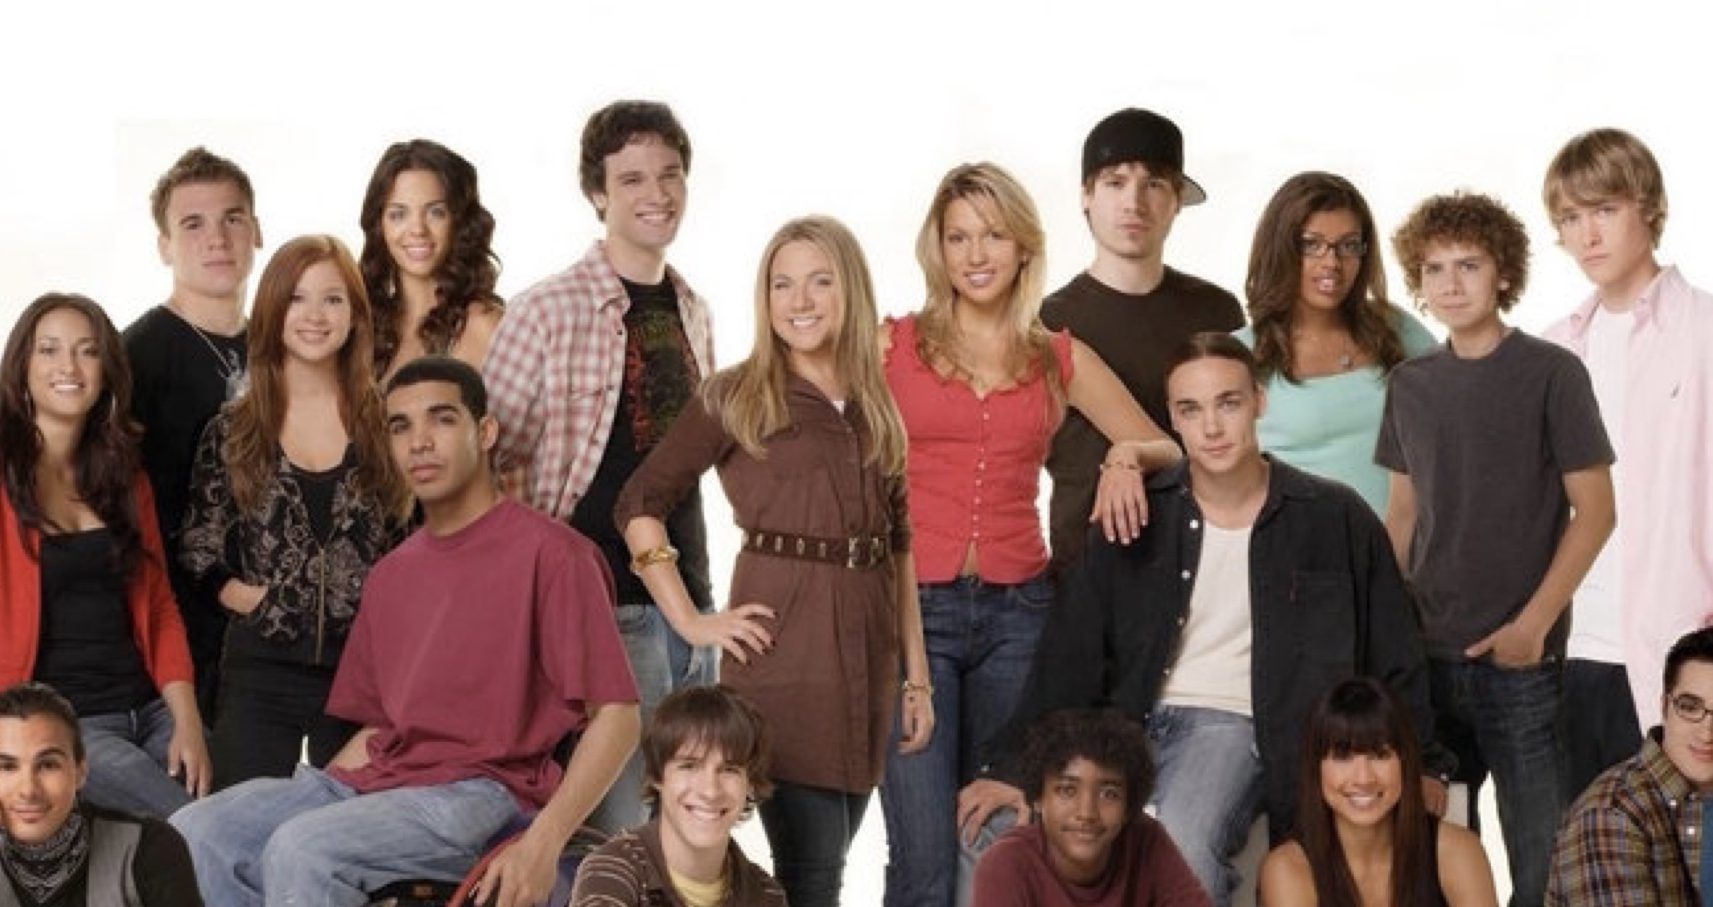 The cast of Degrassi: The Next Generation